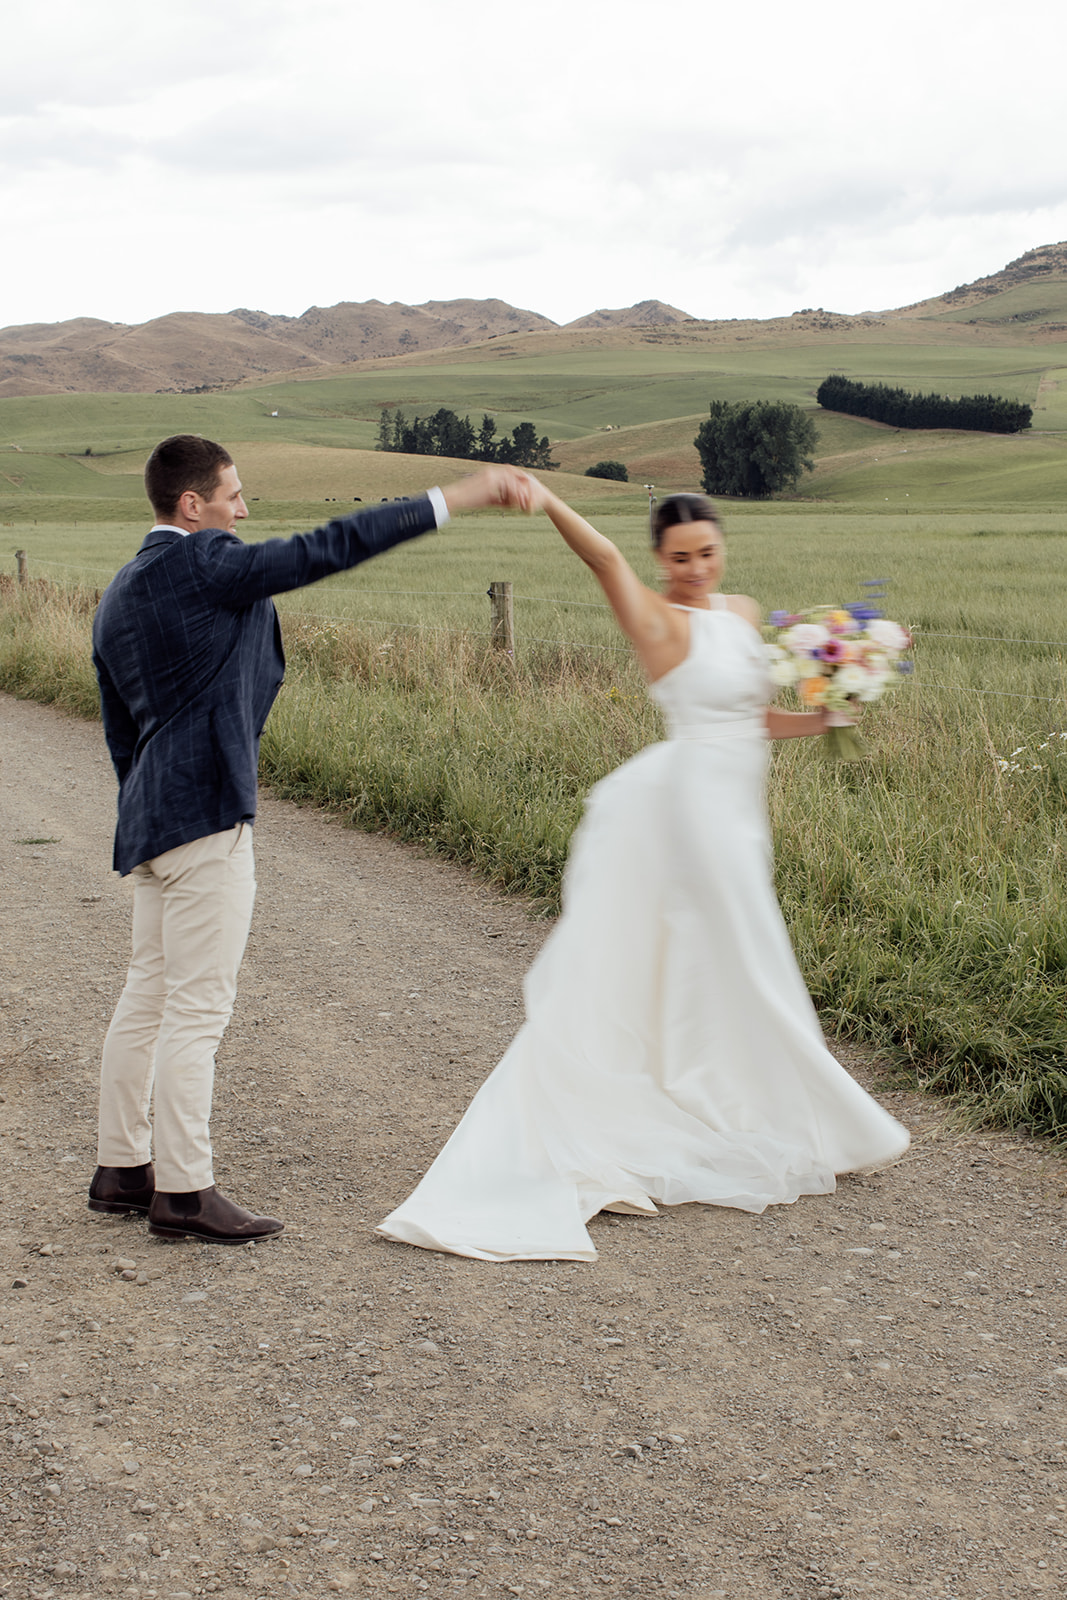 Layne by Karen Willis Holmes-halter neckline wedding dress-Jessica & Tim- Bride and groom are seen taking beautfiul sunset wedding photos, while bride looks like a modern princess in her Layne gown from the BESPOKE collection.